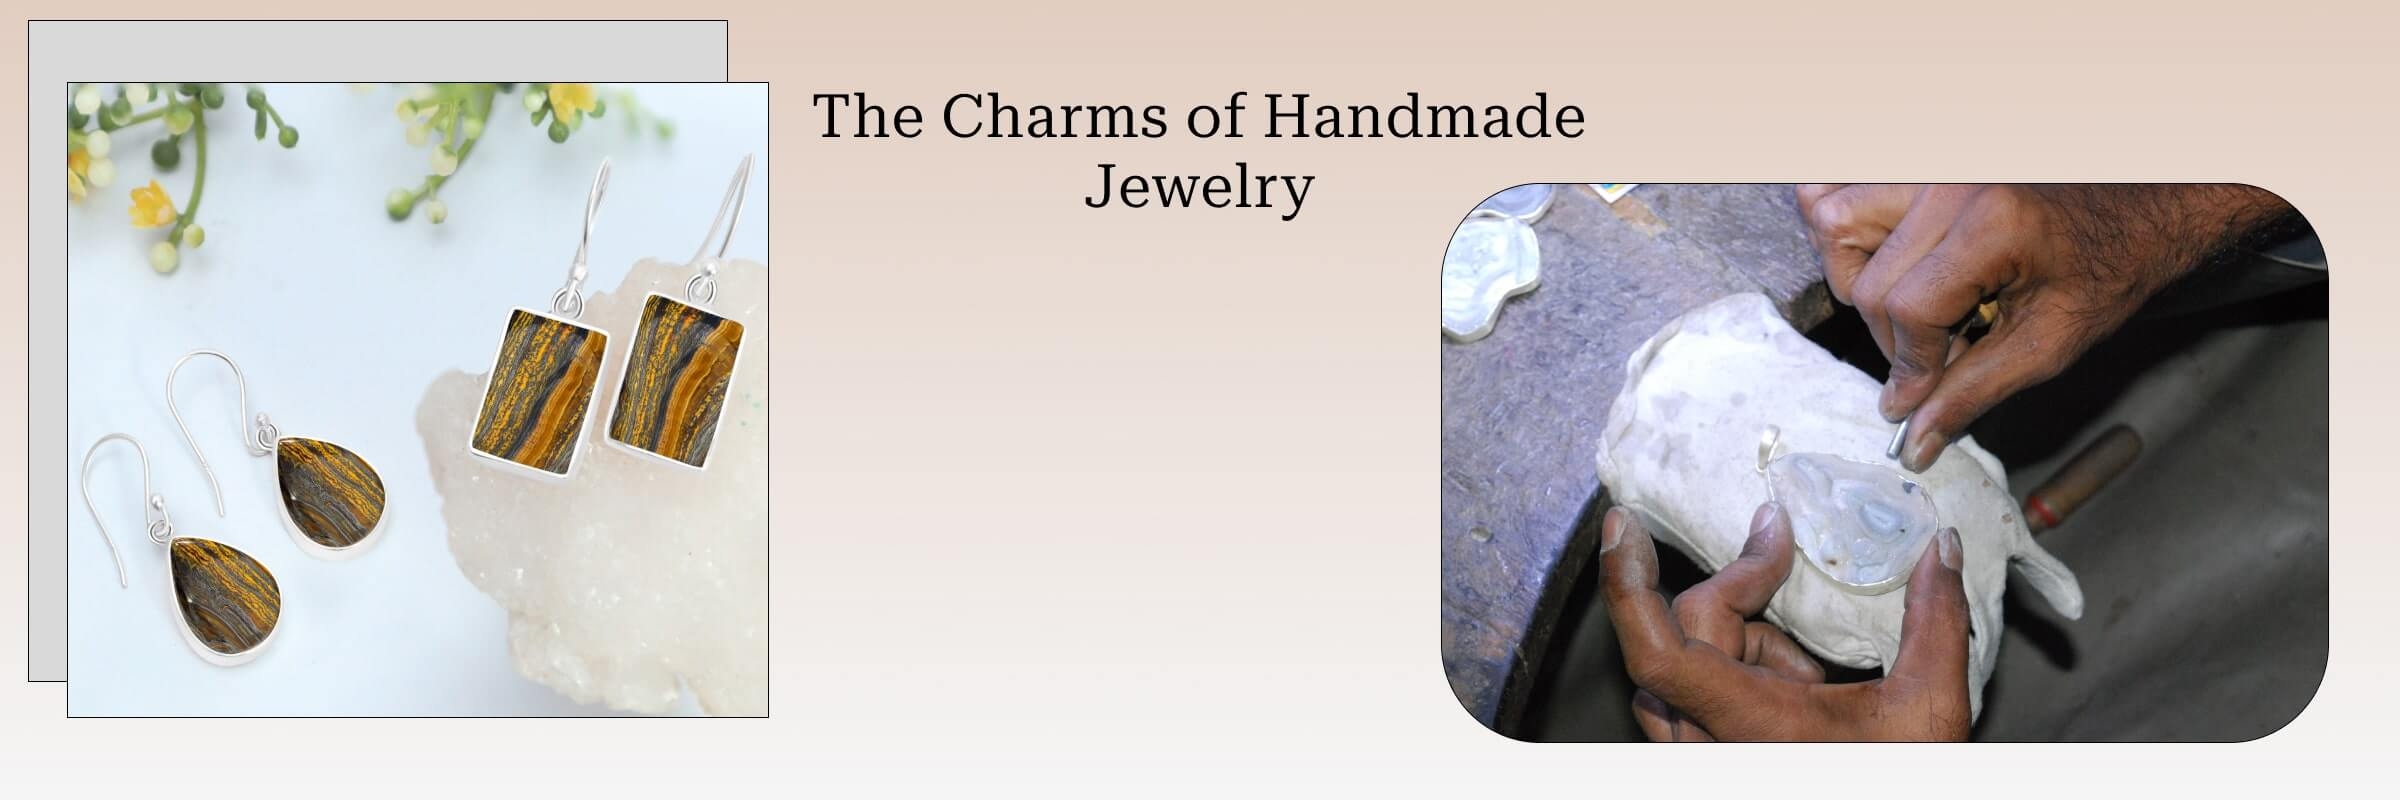 Reasons why one should try Handmade Jewelry